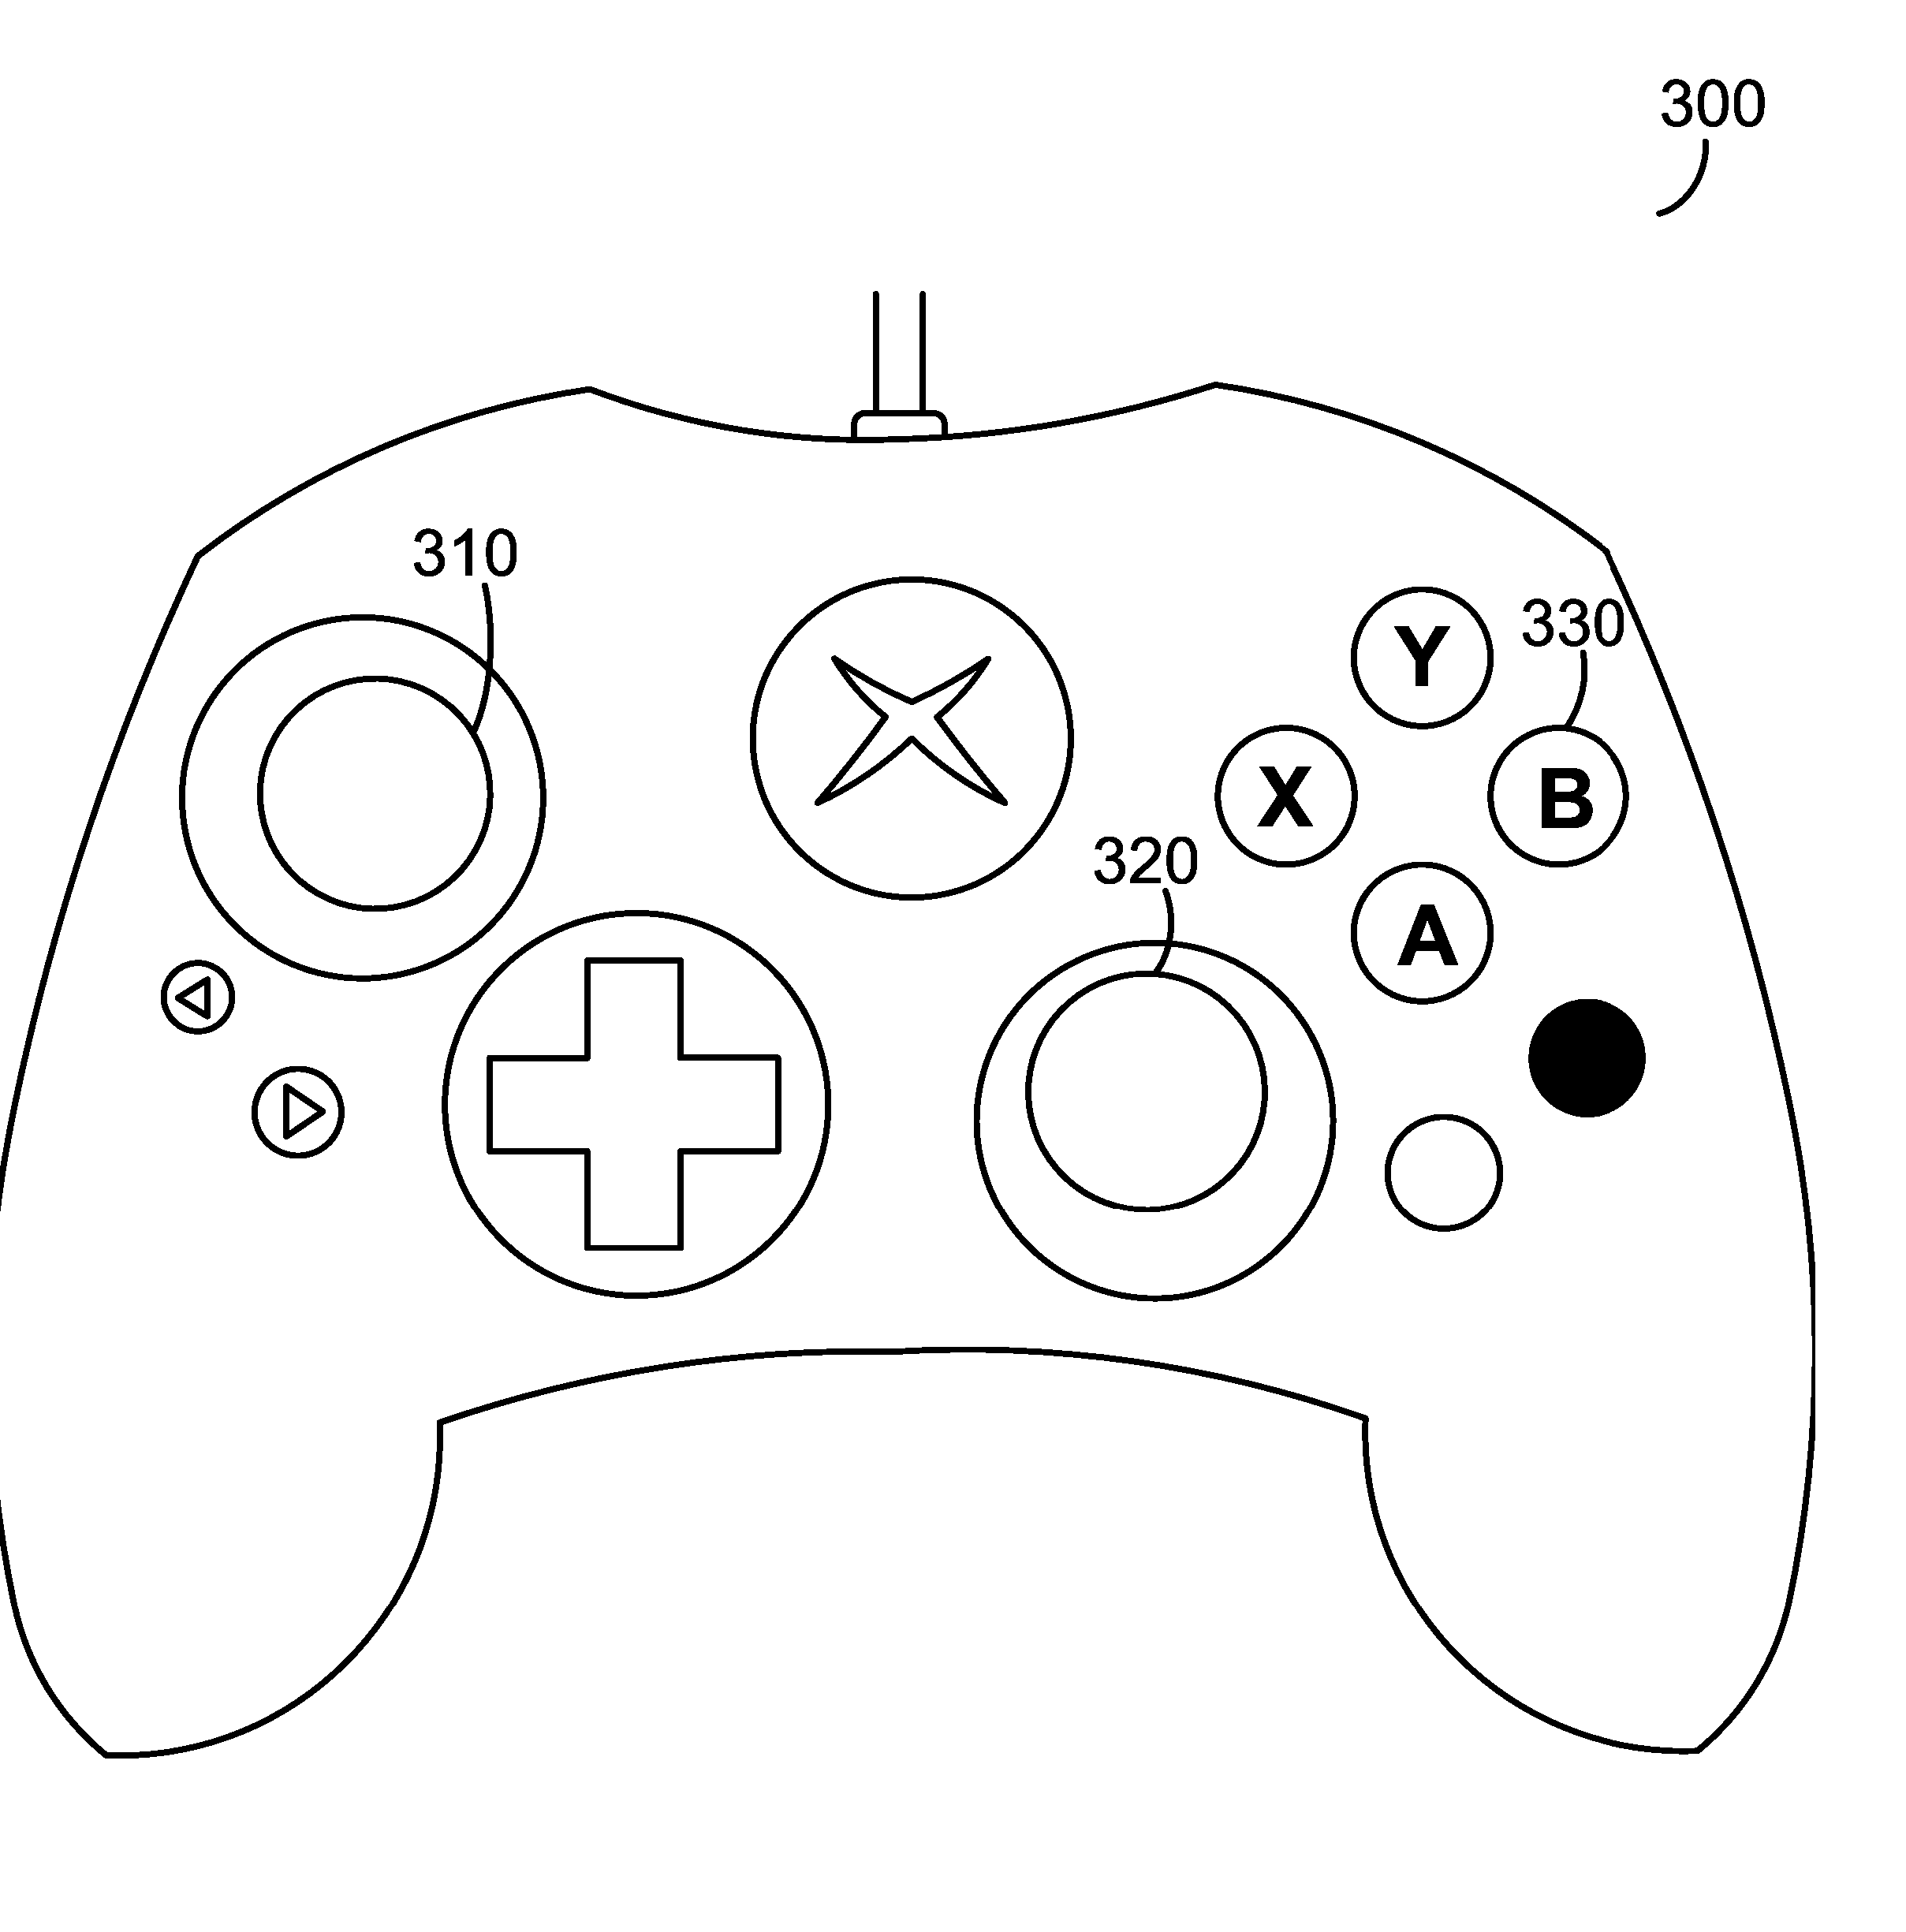 Method and apparatus for providing computer pointing device input to a video game console